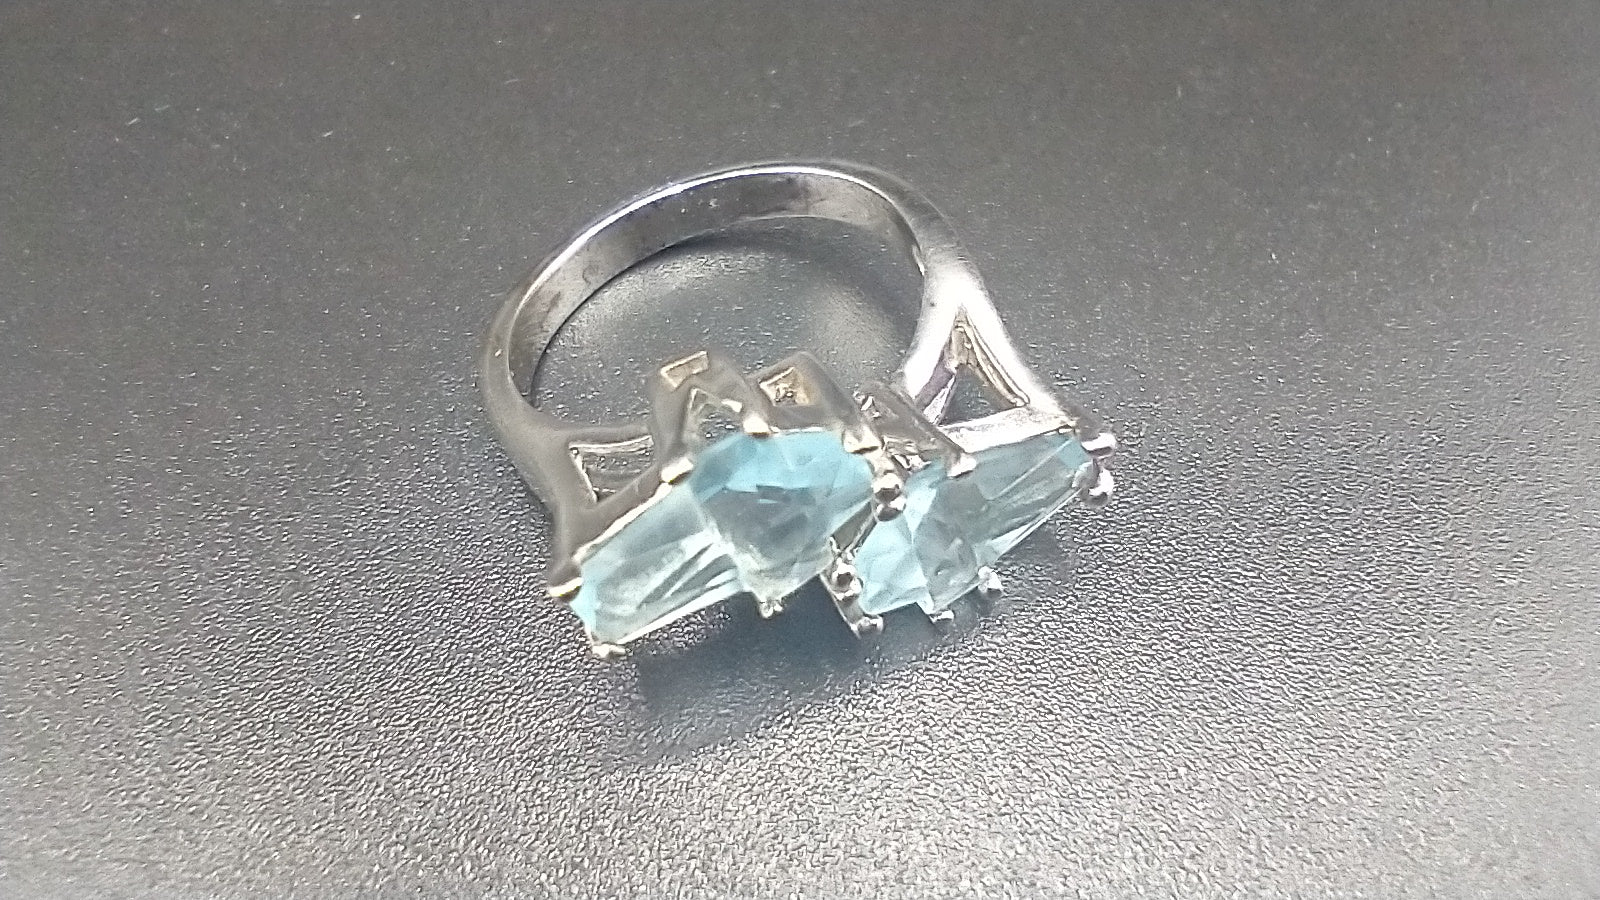 "AT THE CROSS" Powder blue stone on 925 sterling silver. ring is size 7. $65.